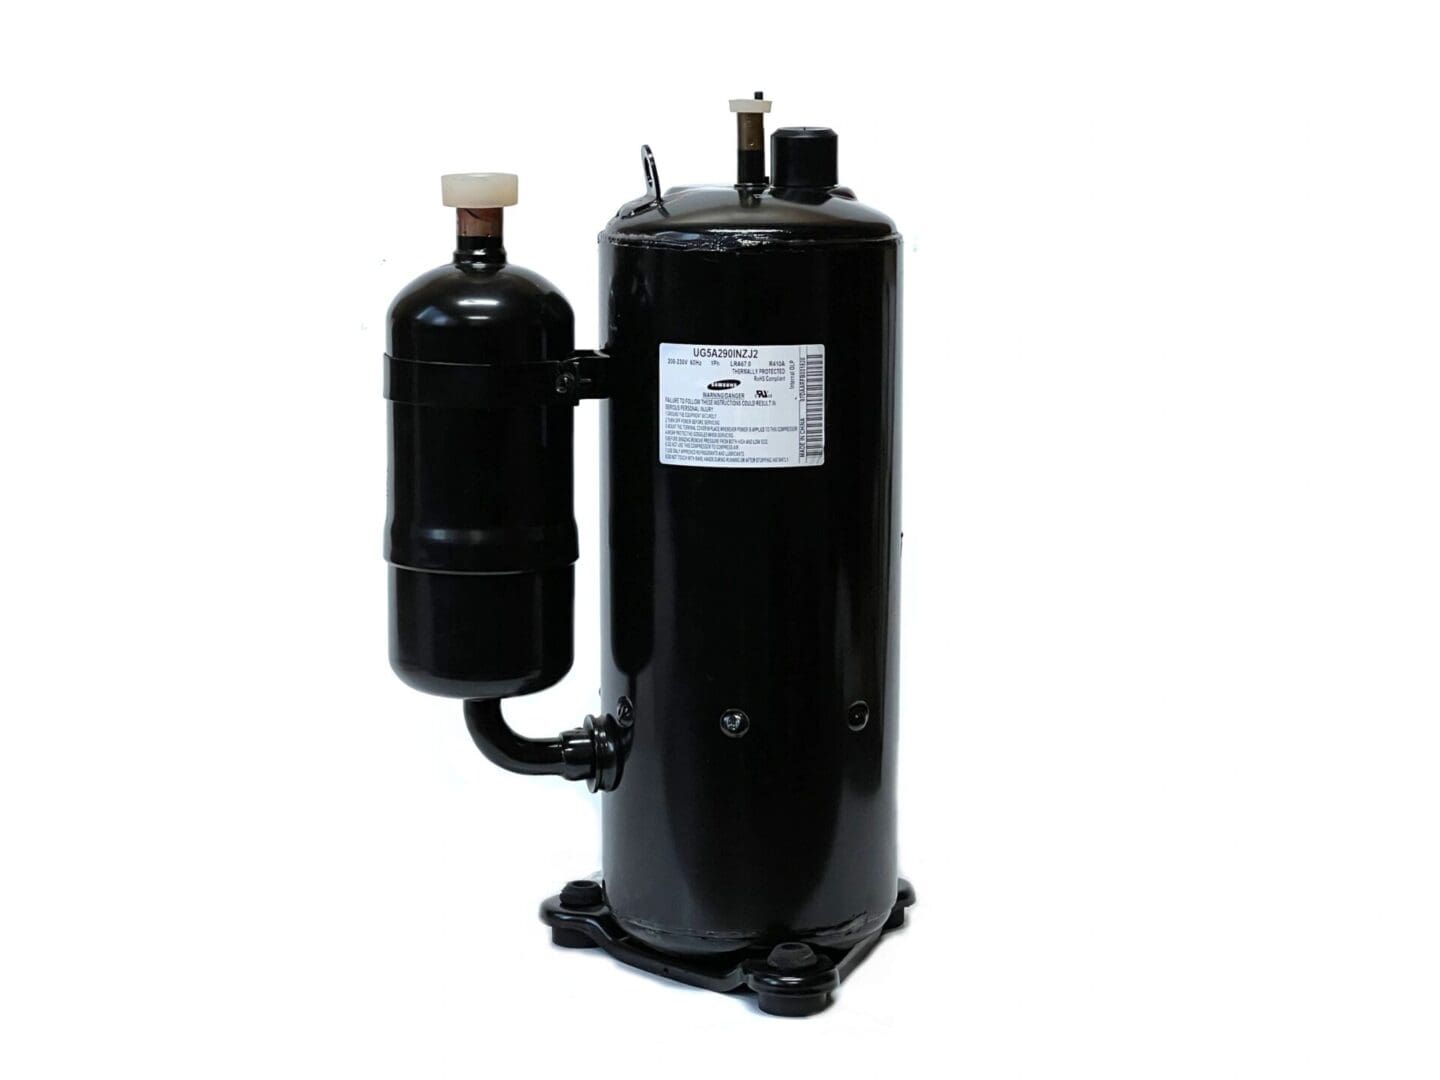 A black compressor with a tank attached to it.